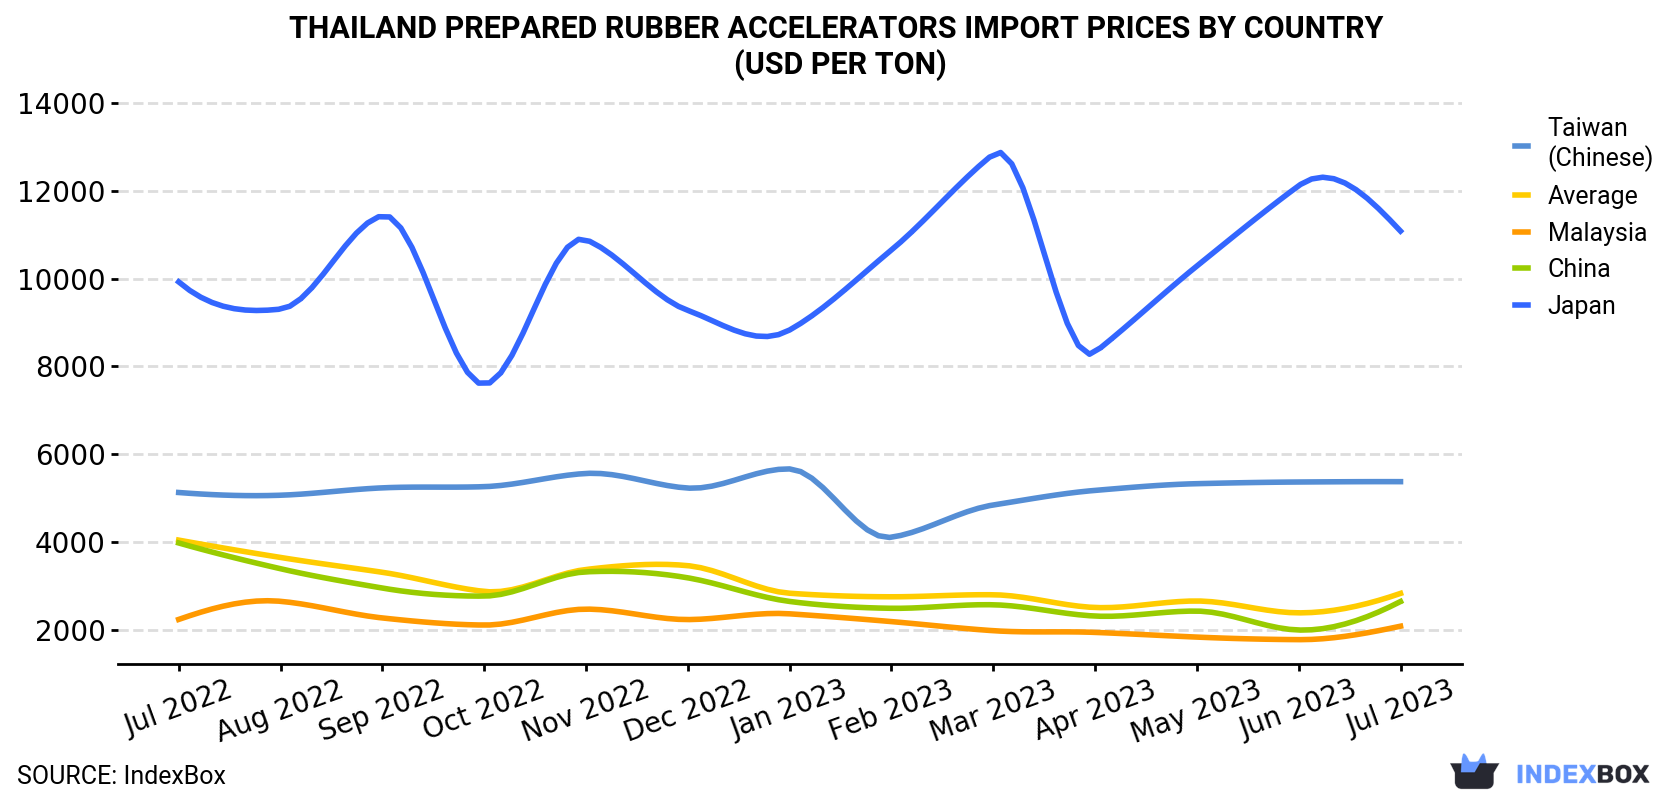 Thailand Prepared Rubber Accelerators Import Prices By Country (USD Per Ton)